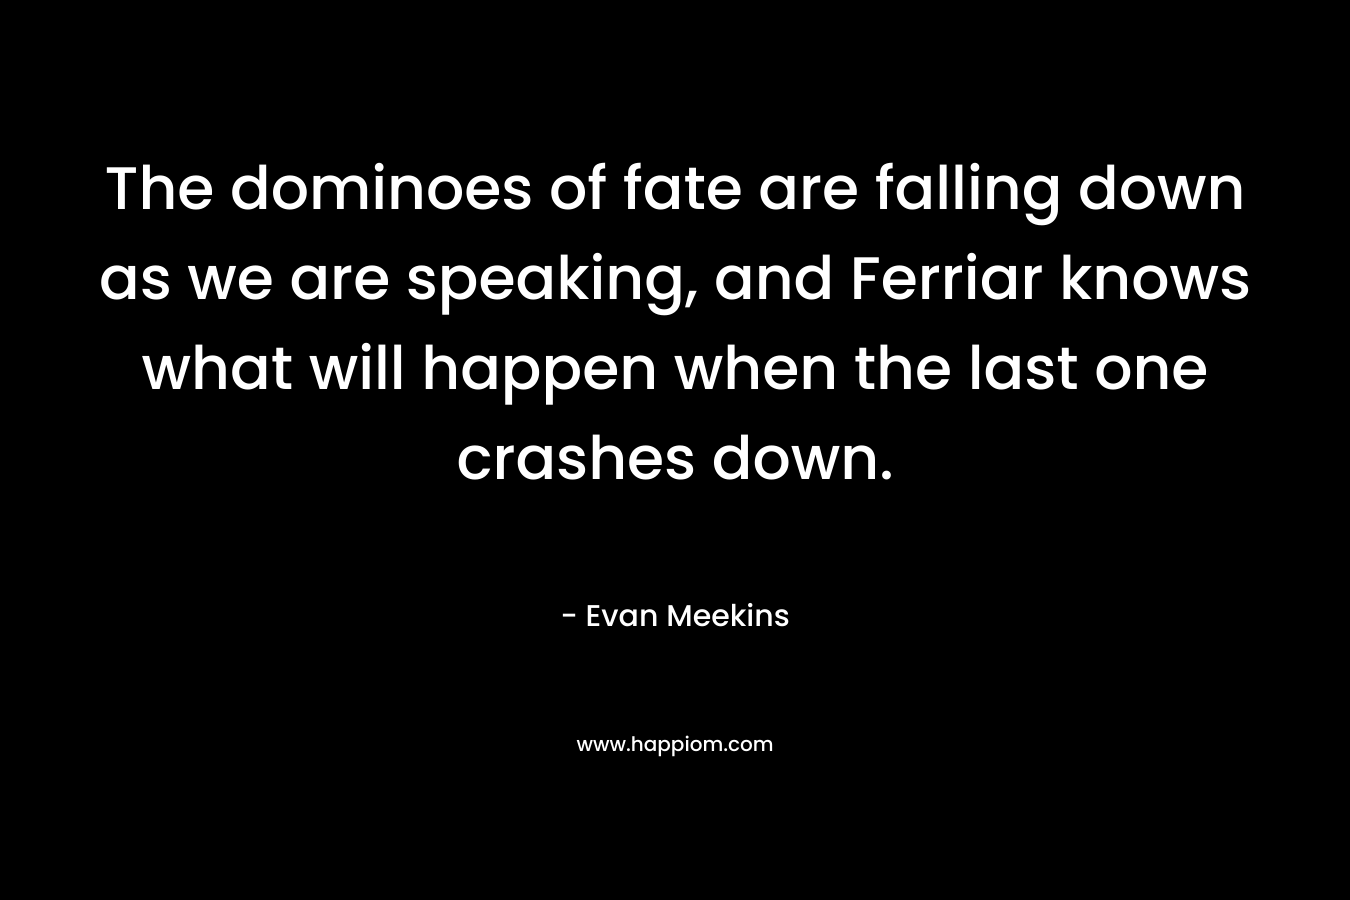 The dominoes of fate are falling down as we are speaking, and Ferriar knows what will happen when the last one crashes down.